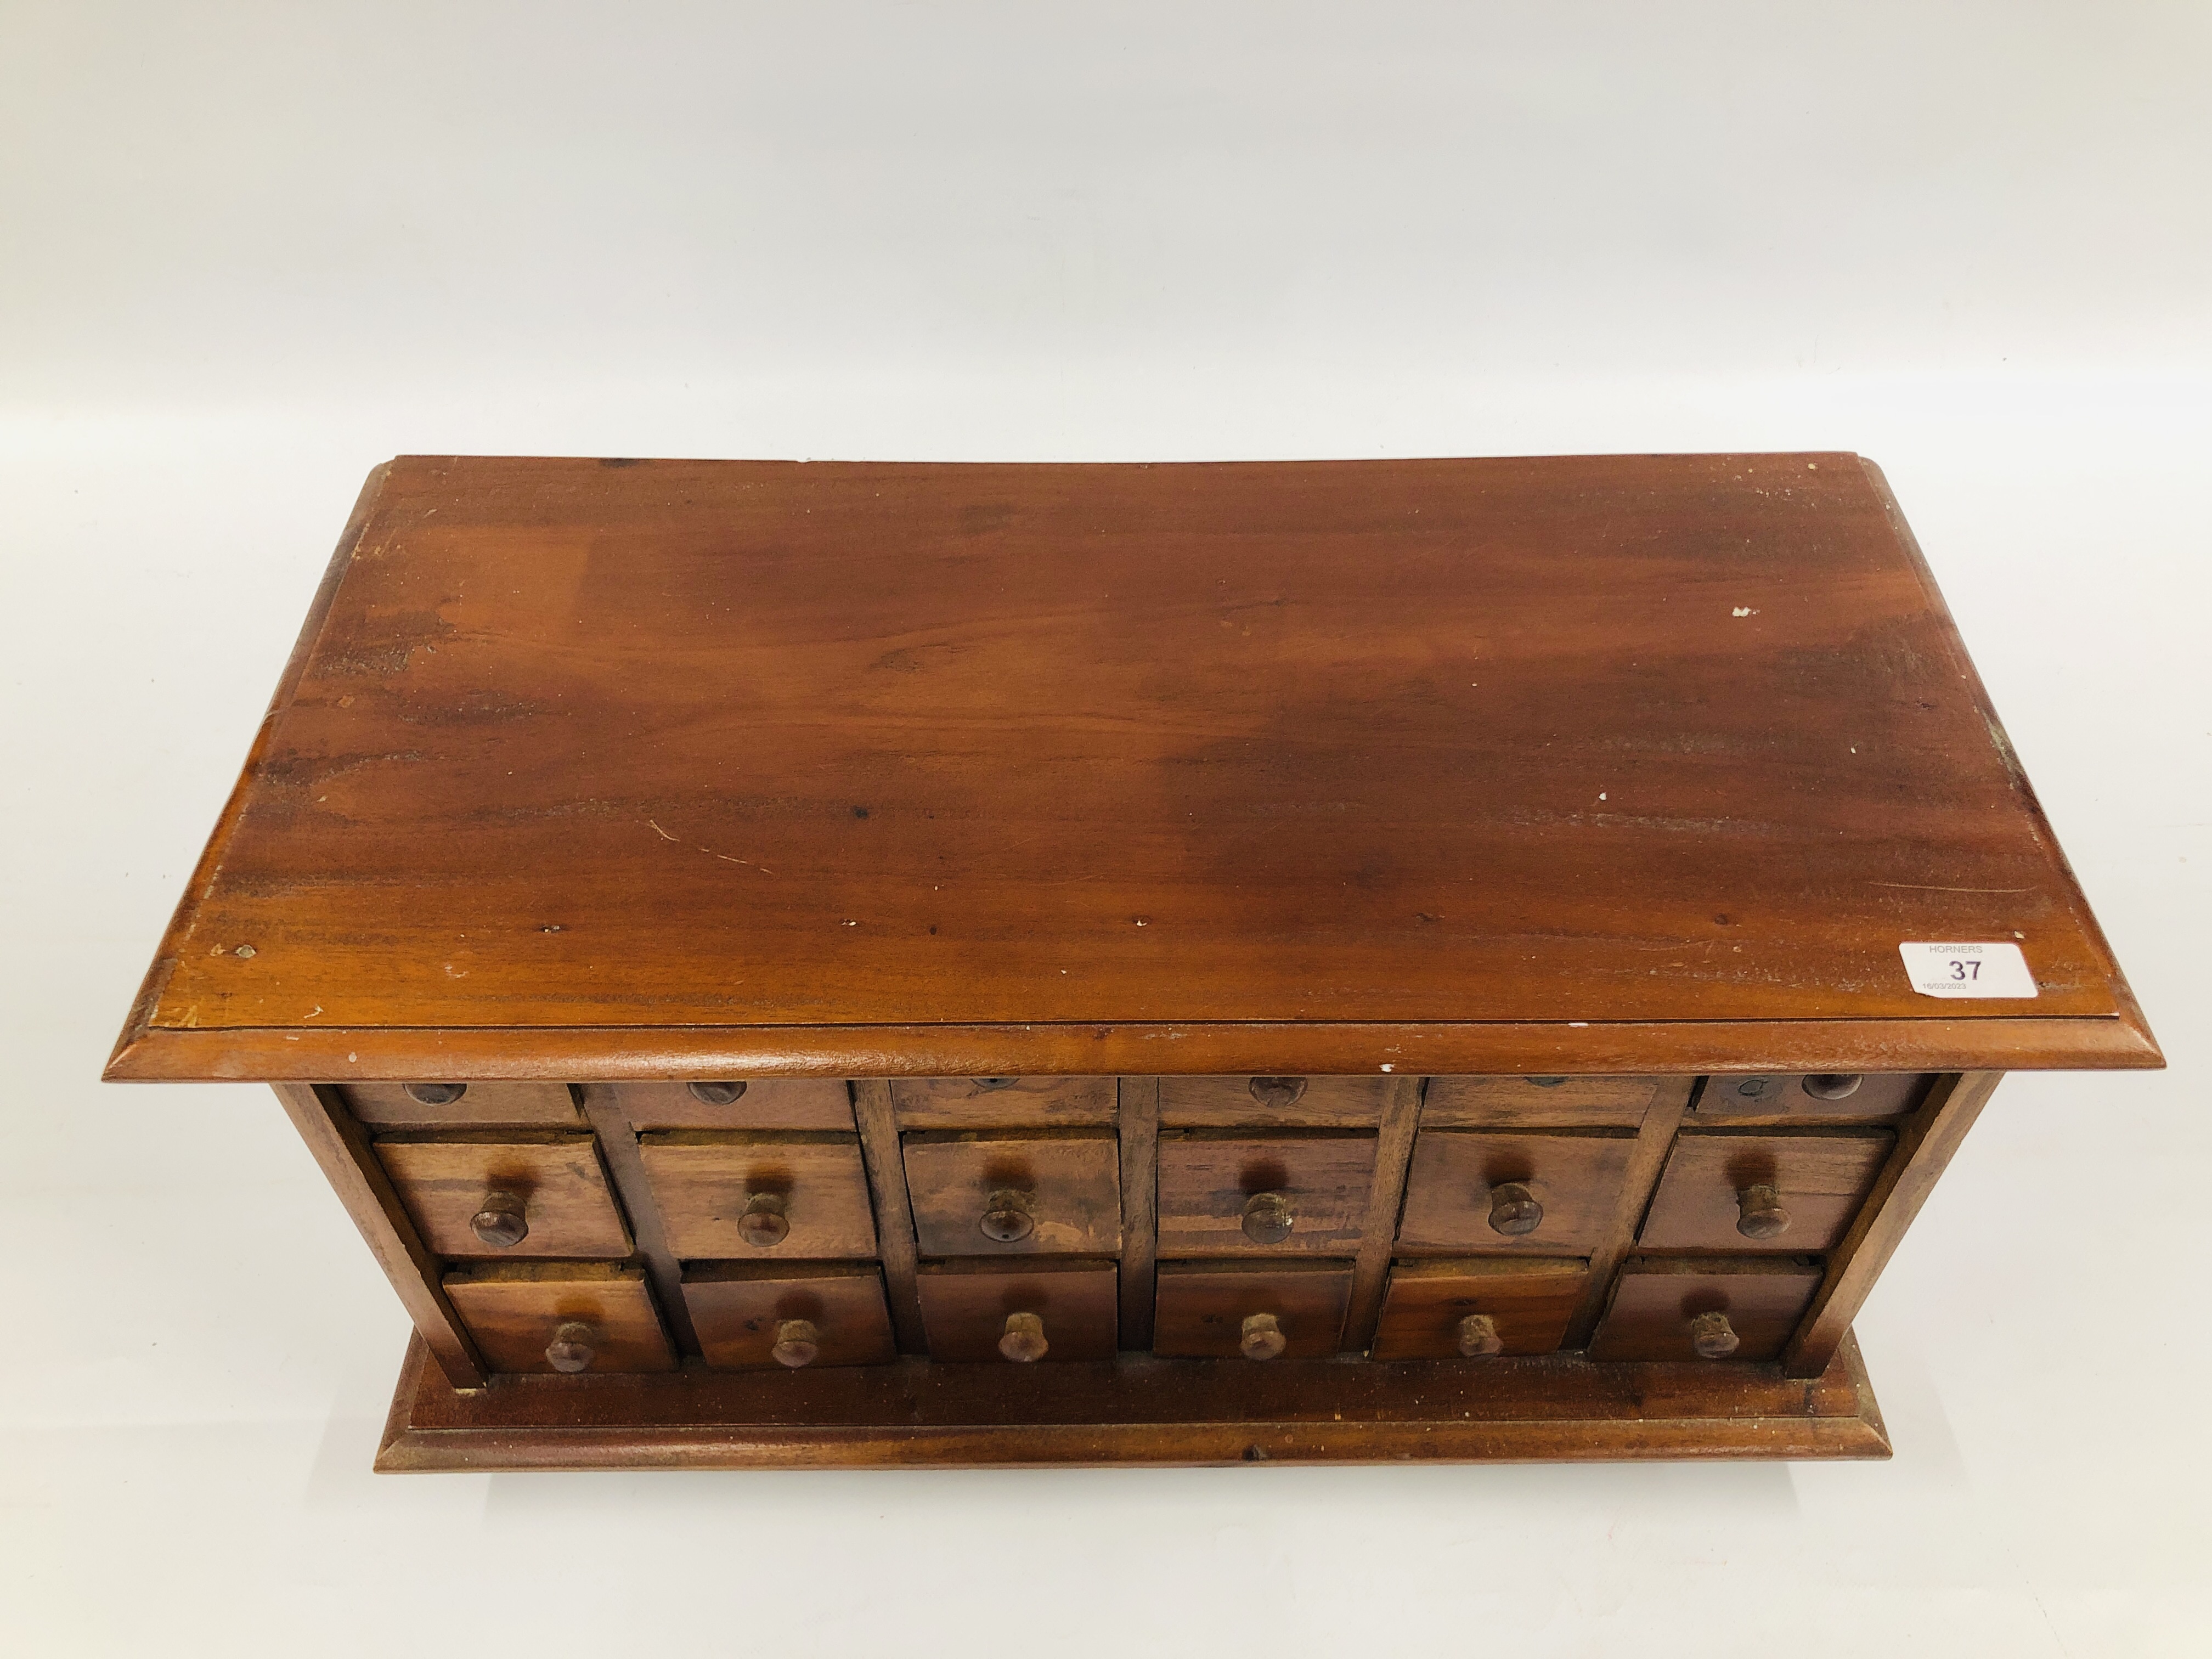 A REPRODUCTION HARDWOOD 18 DRAWER SPICE CHEST - W 64CM X D 31CM X H 33CM. - Image 2 of 5